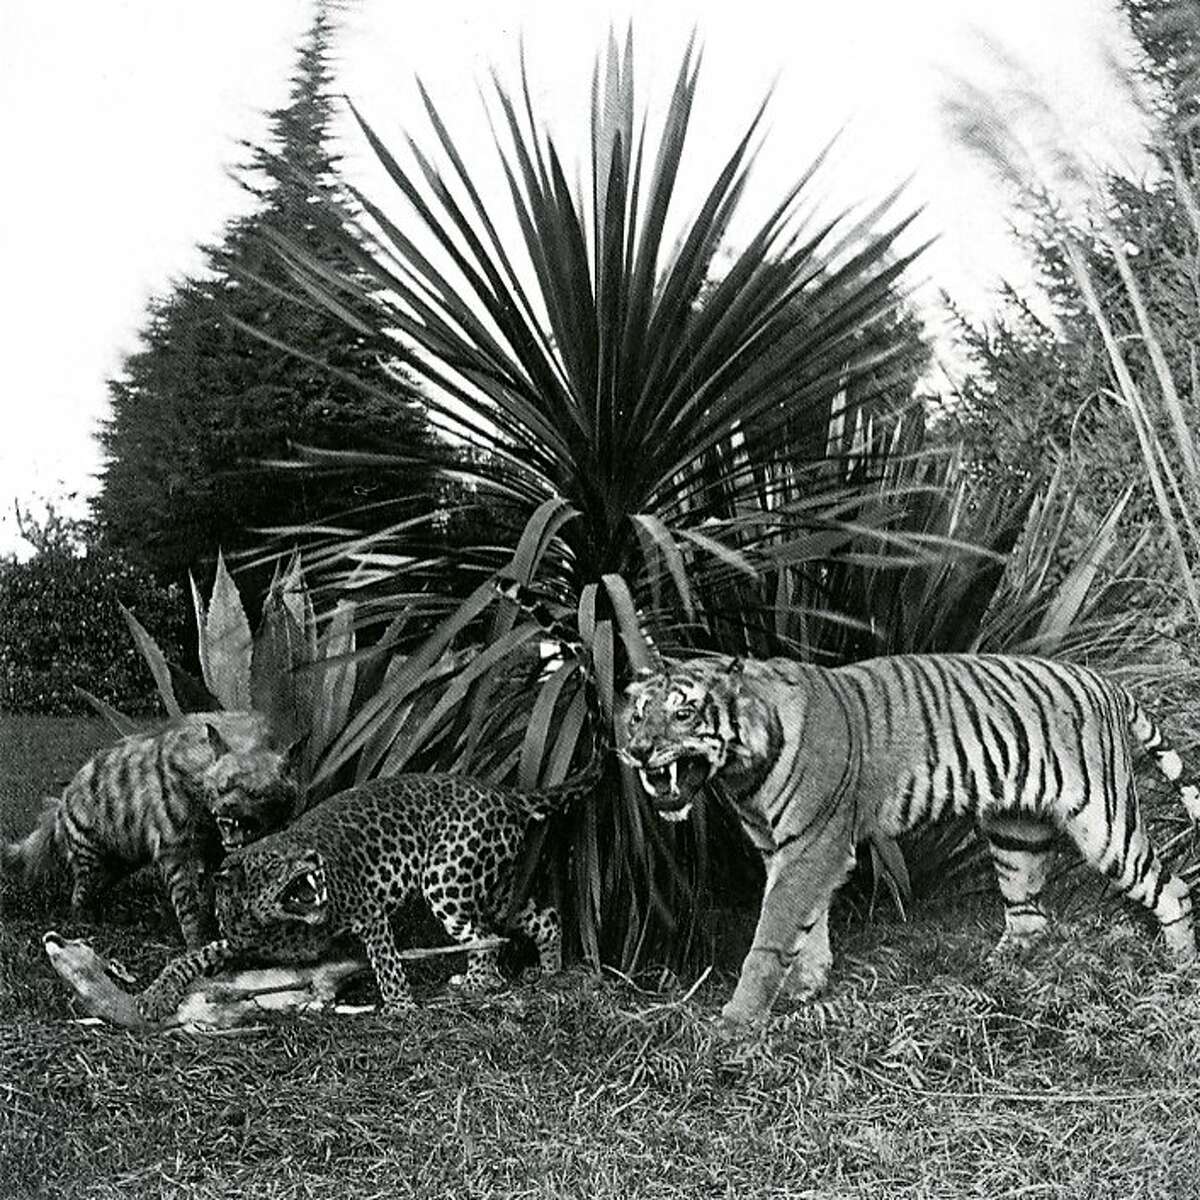 A taxidermed tiger and other animals were among the exhibits at Woodward's Gardens, San Francisco's first amusement park which opened in 1866.